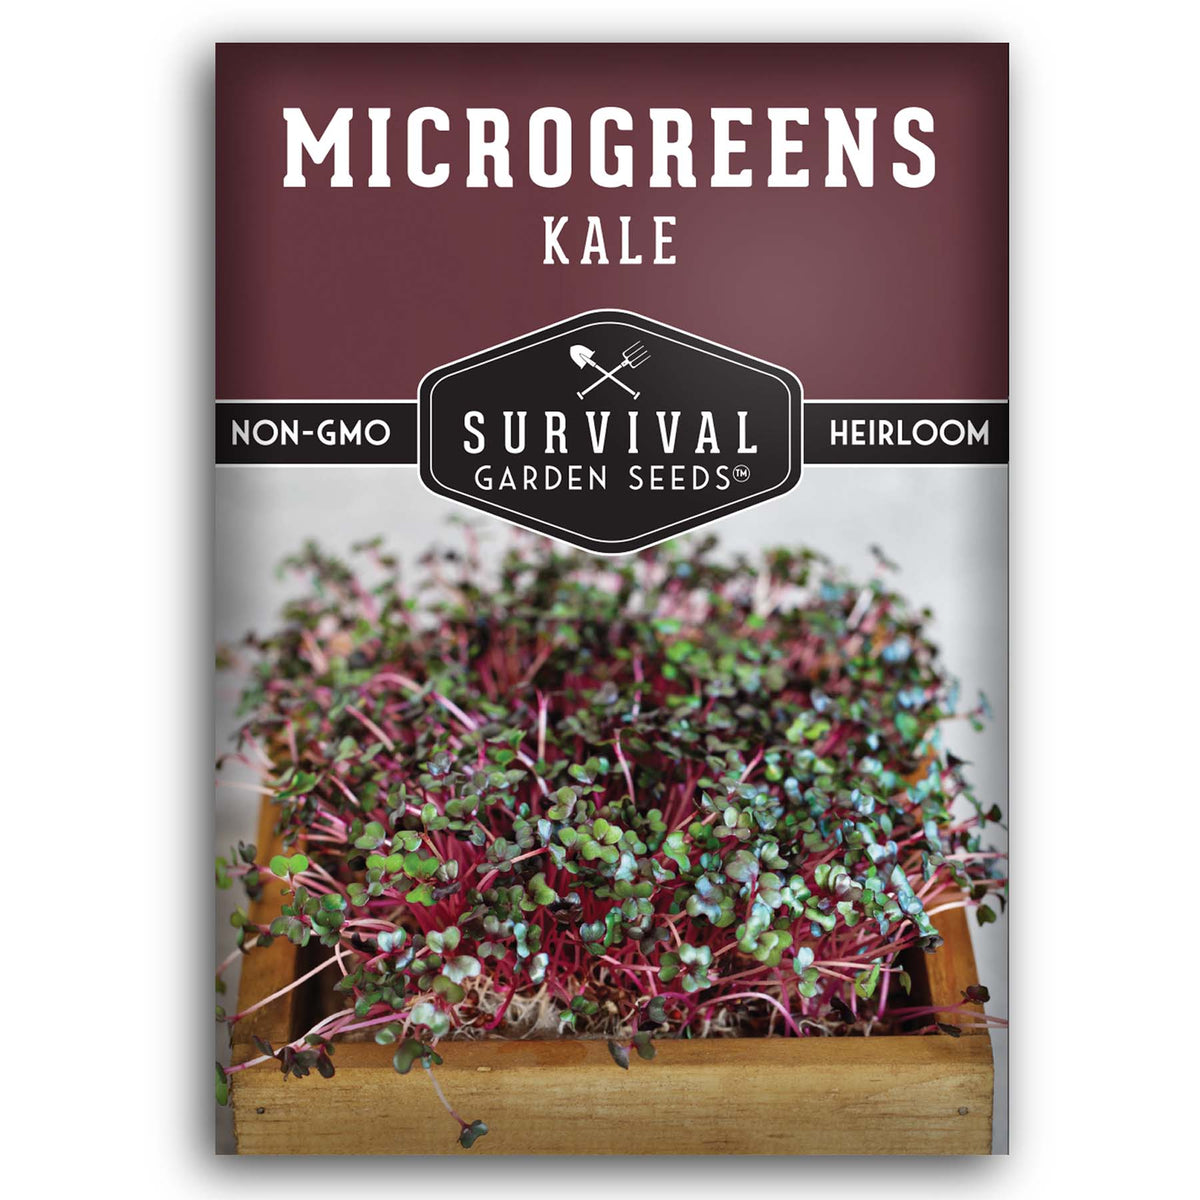 Kale Microgreen seeds for sprouting